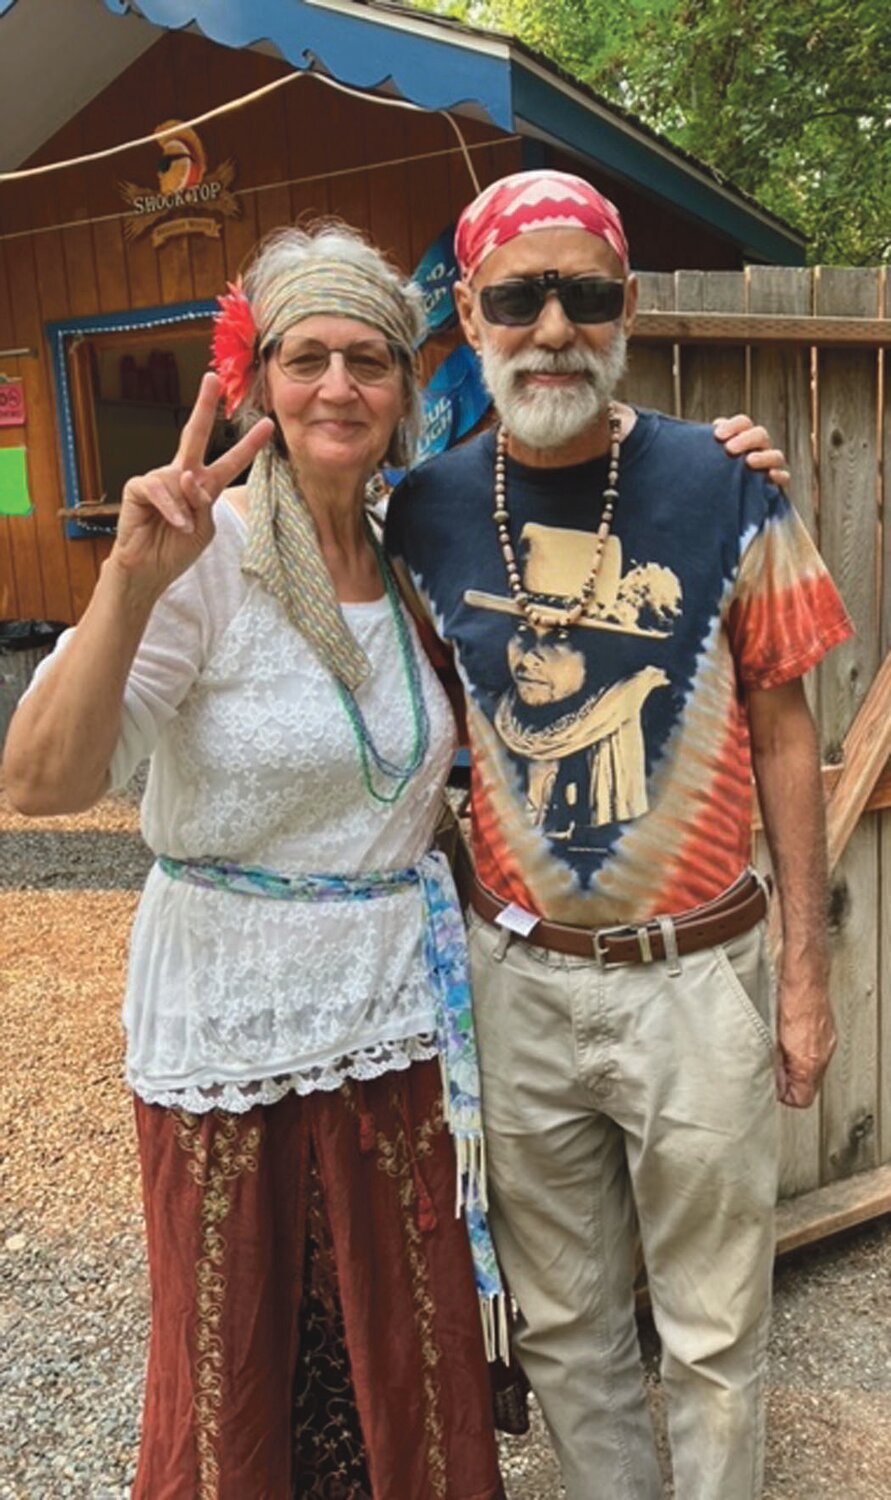 Gene “Harmony” Ramos (right) and Beth Felker (left) enjoyed the musical atmosphere that filled the air at the event. 
Courtesy Catharine Morehead